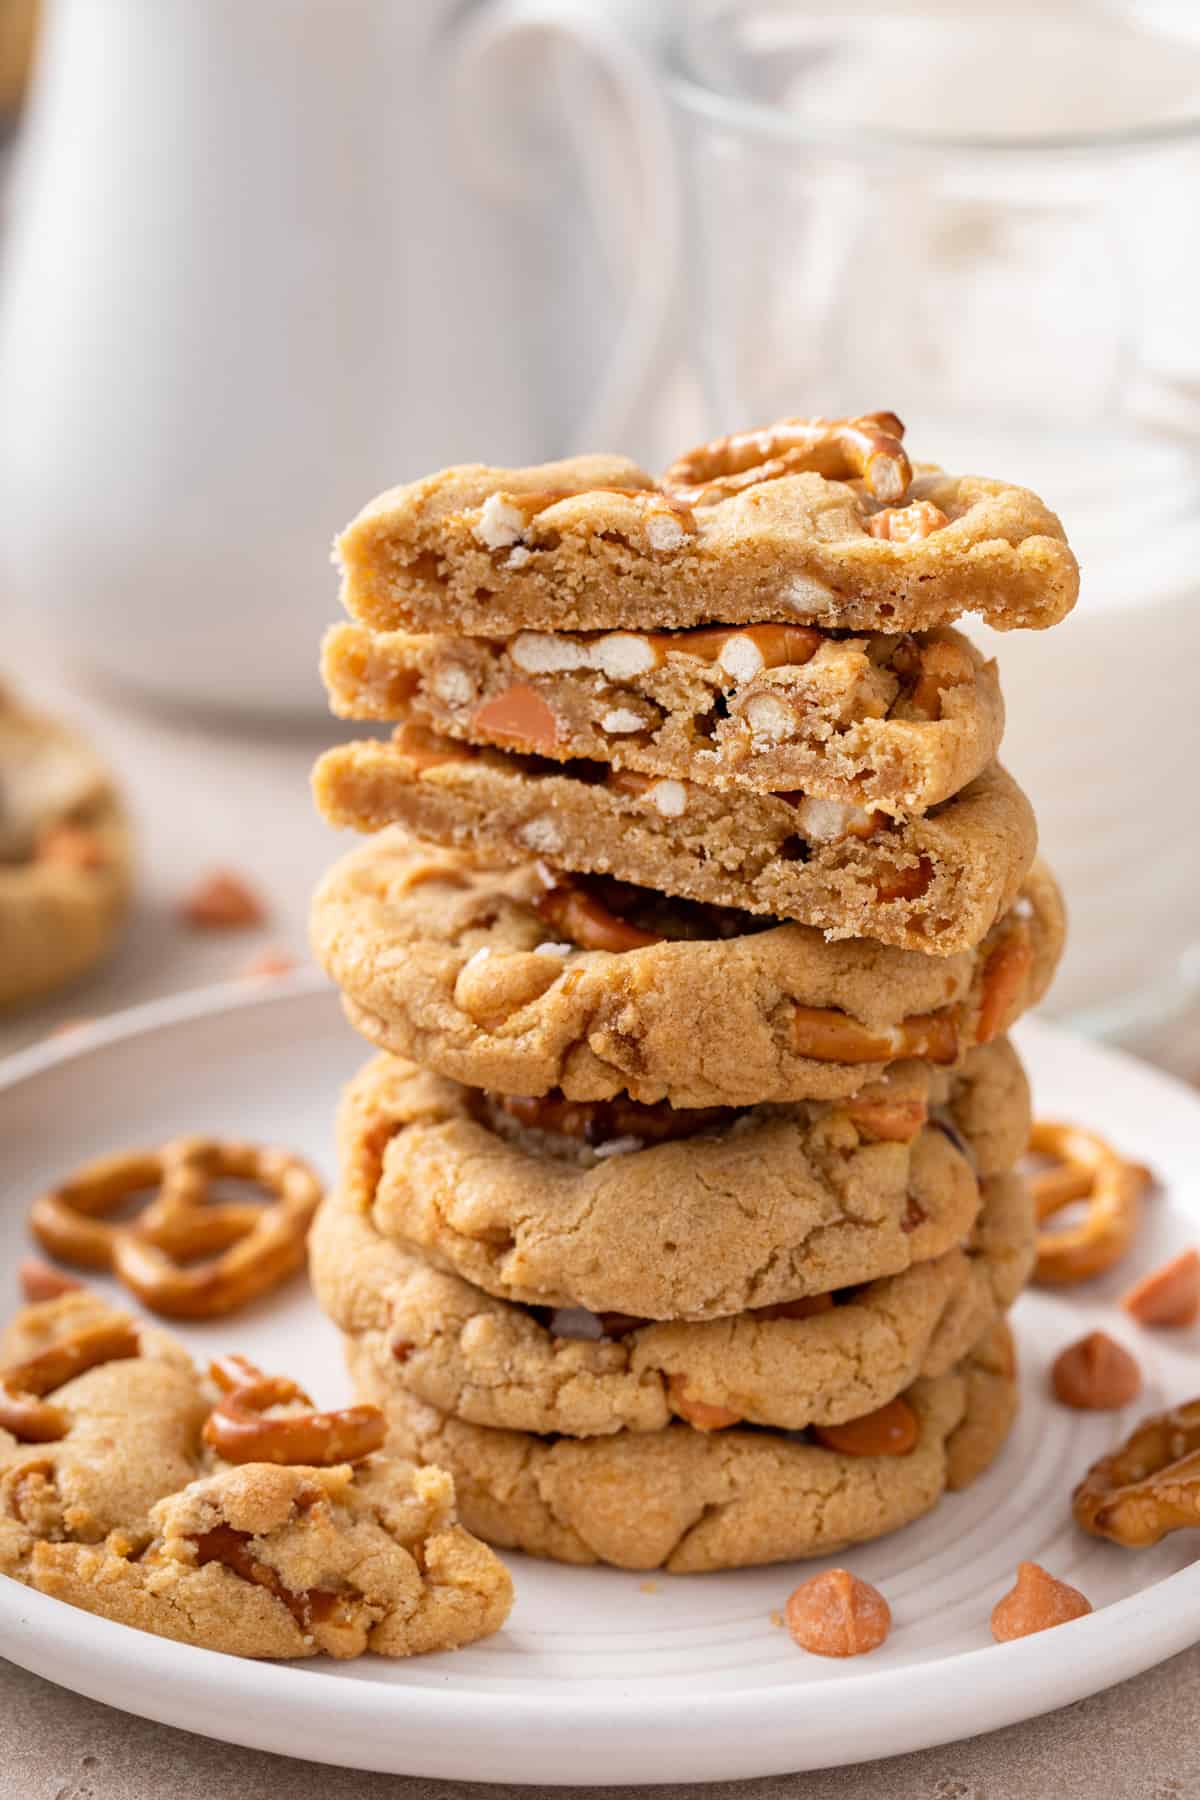 Several stacked salted caramel pretzel cookies. The top cookies are cut in half to show the chewy inner texture.